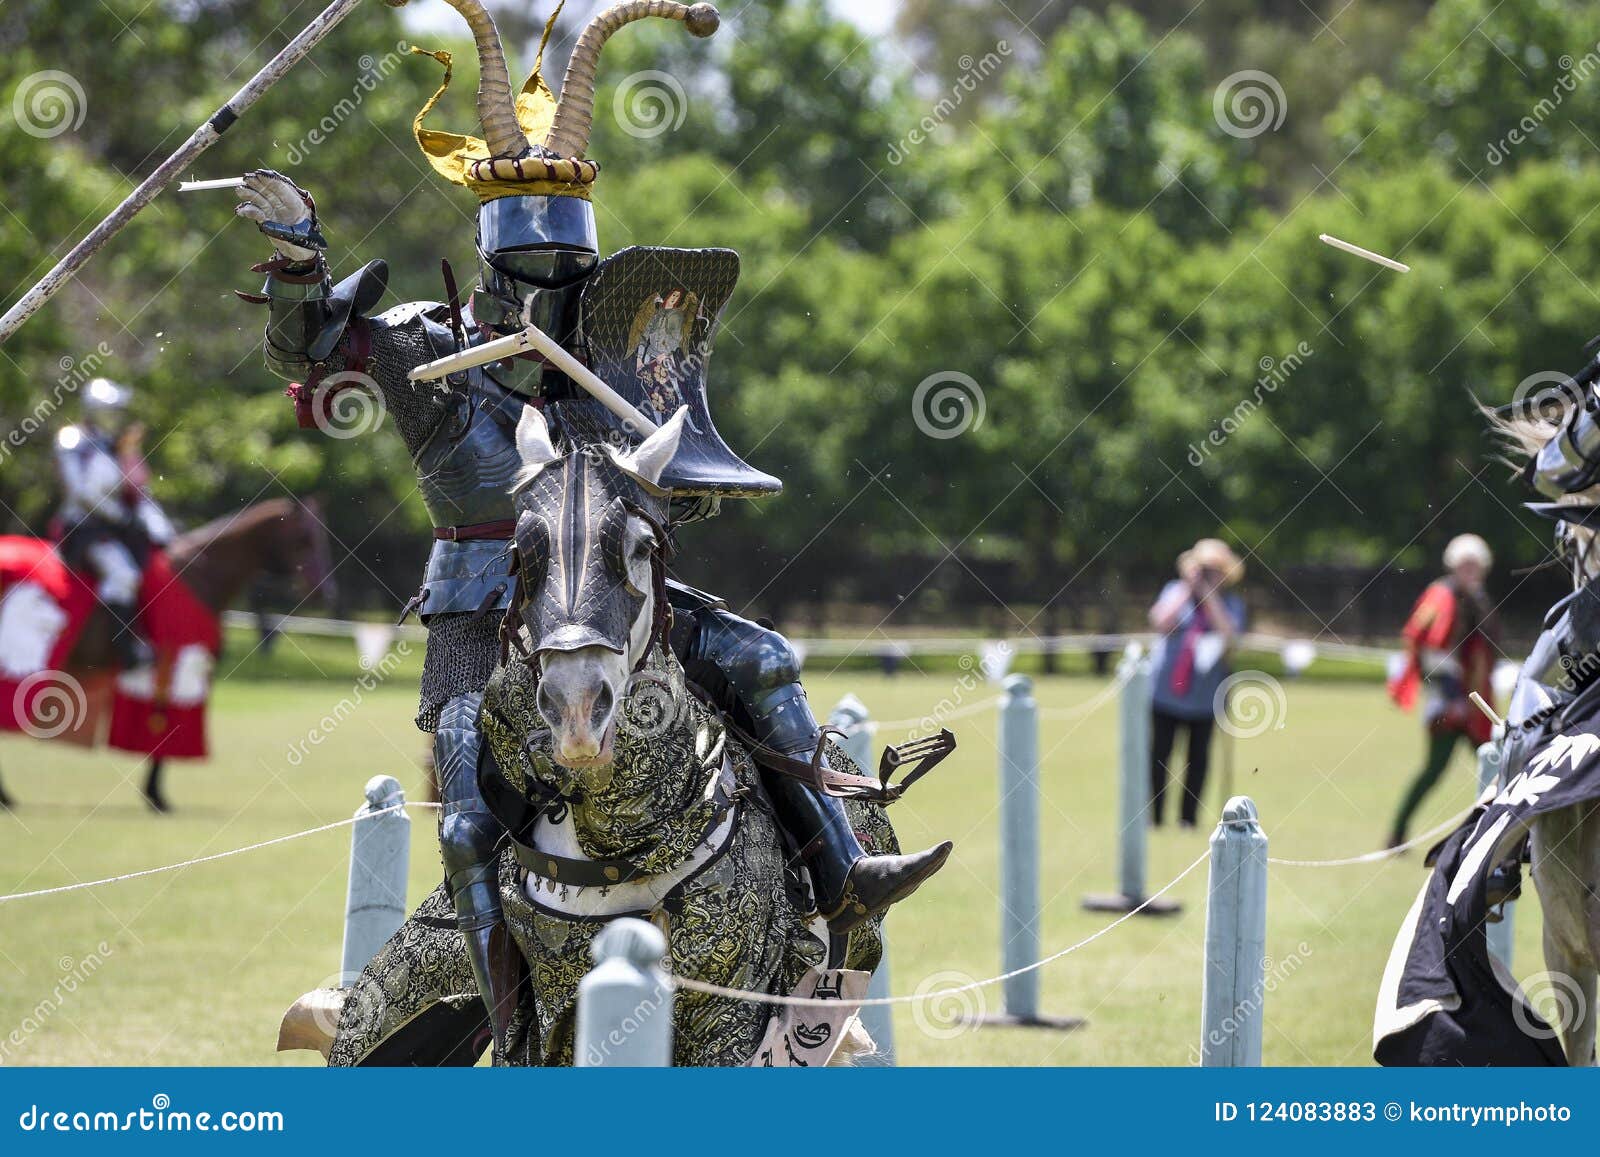 A Knight during Medieval Jousting Tournament Stock Image - Image of